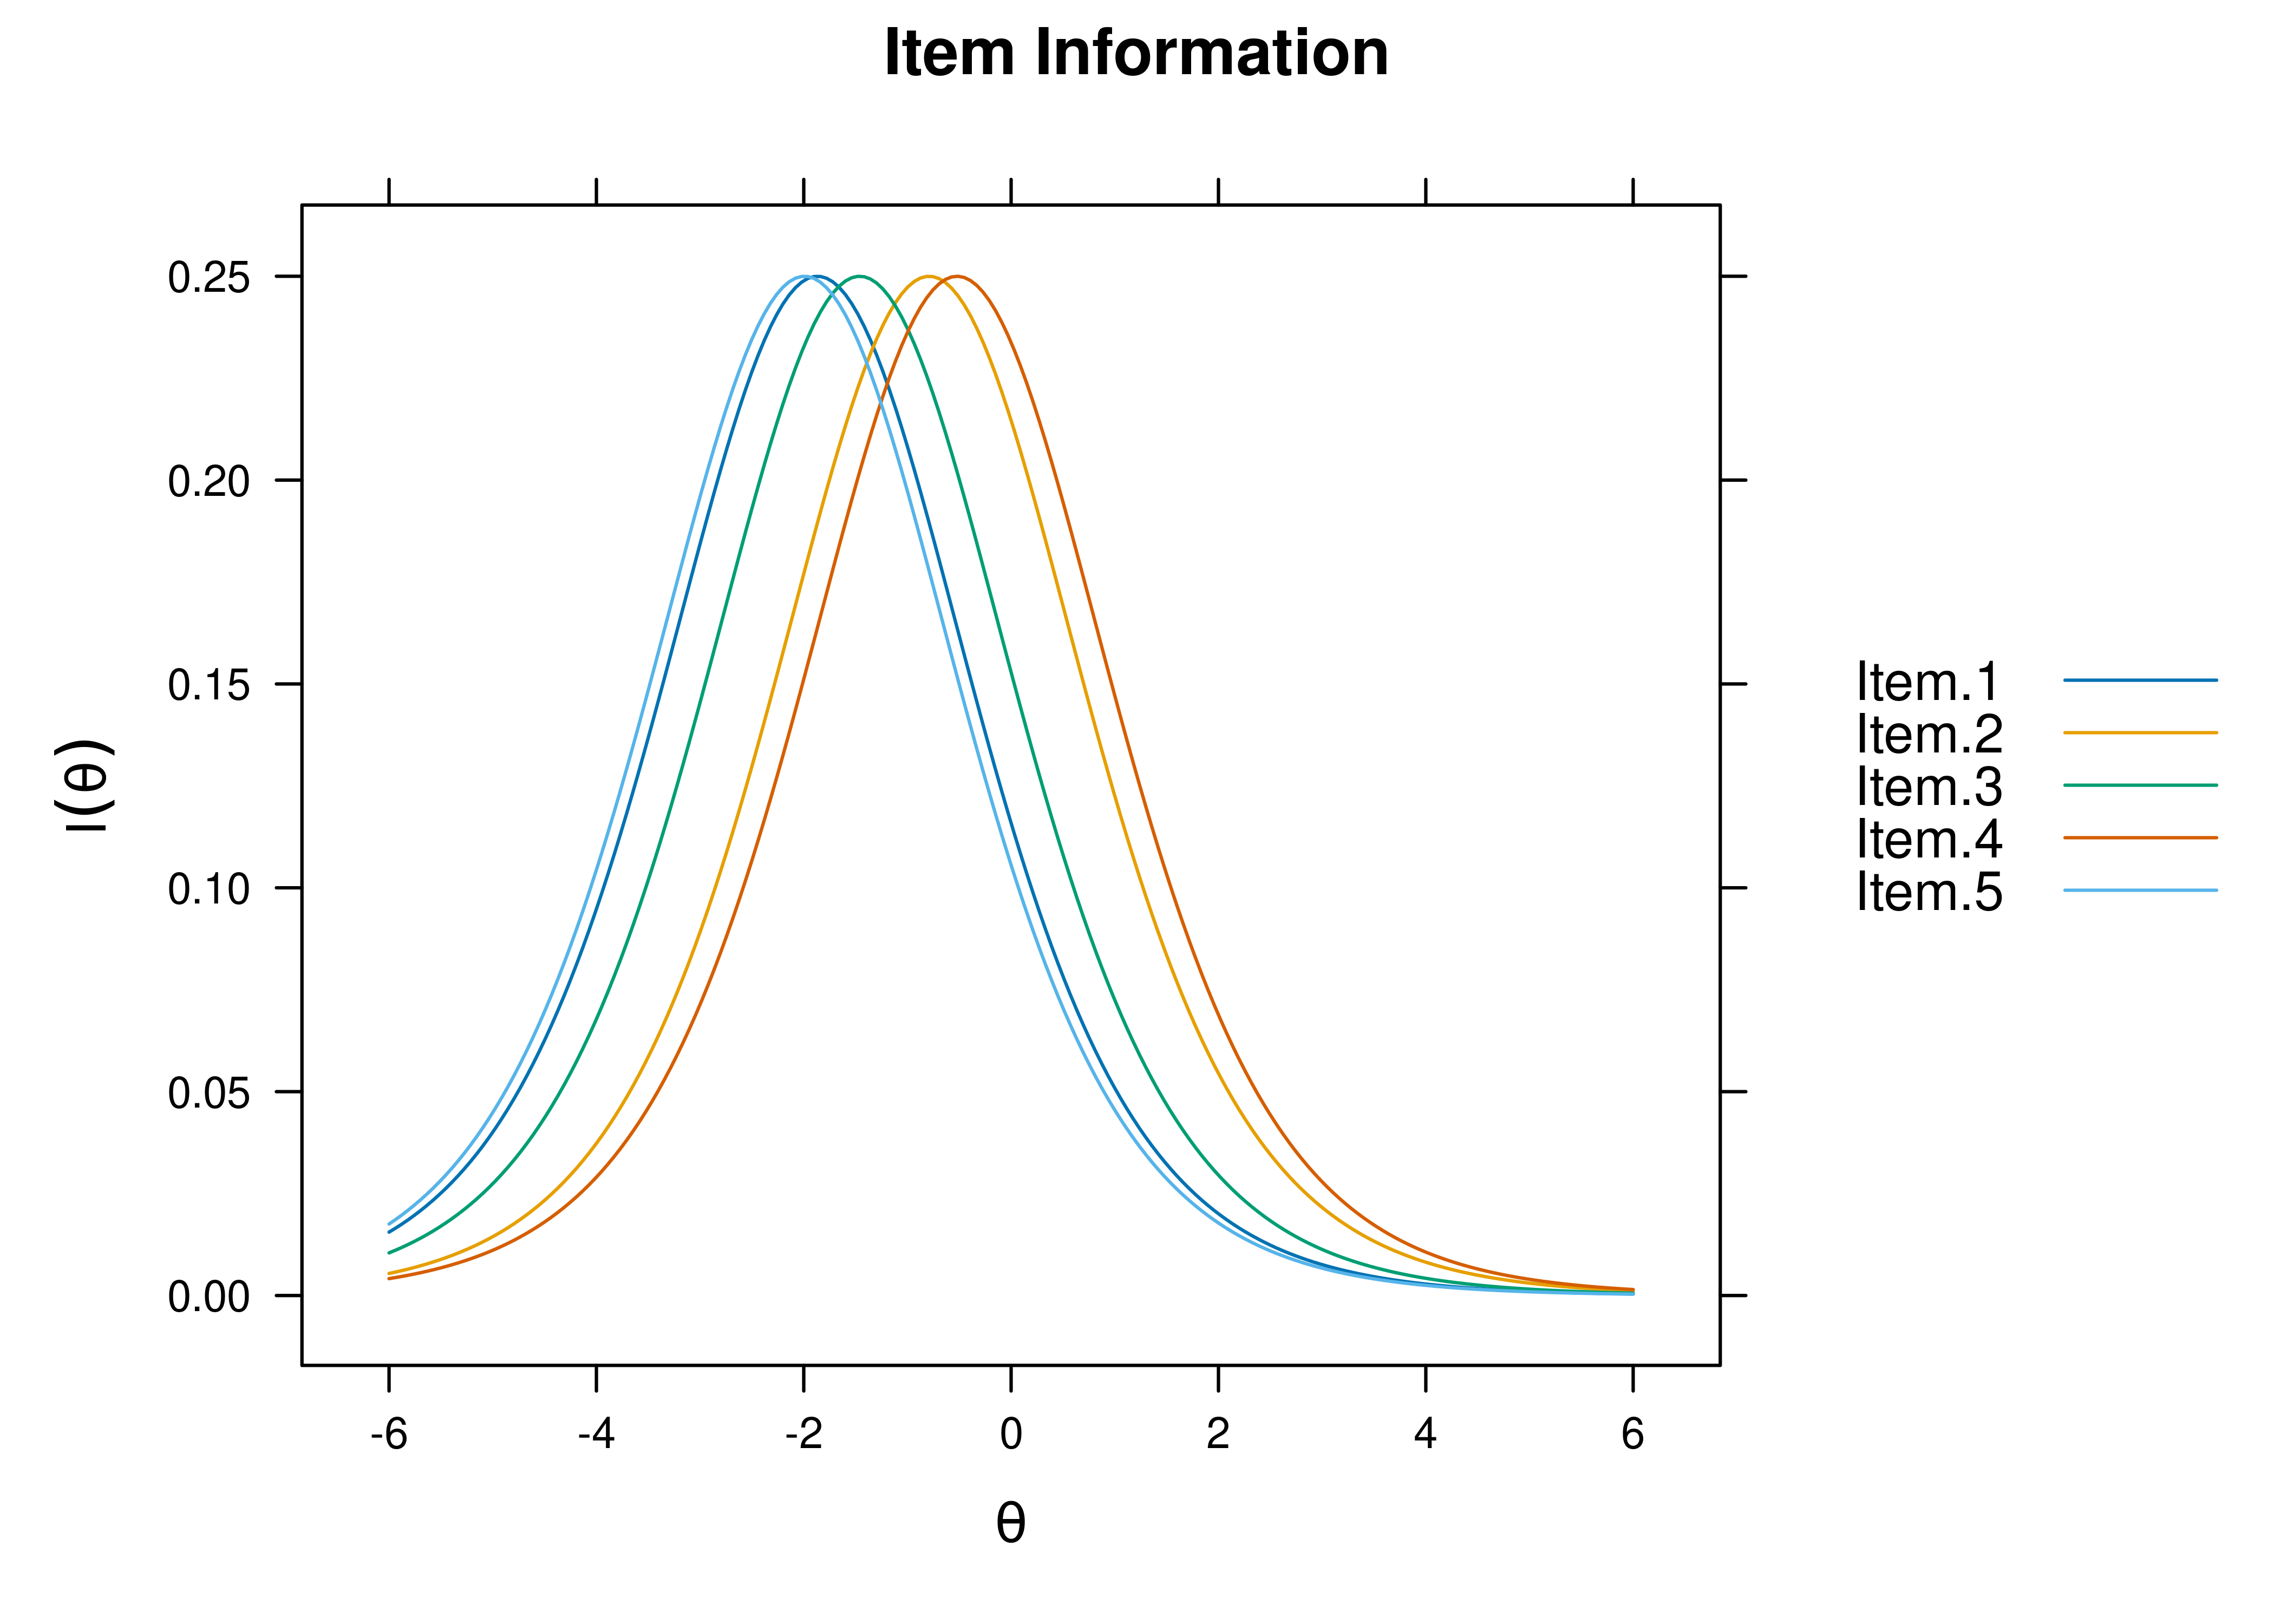 Item Information Curves from Rasch Item Response Theory Model.